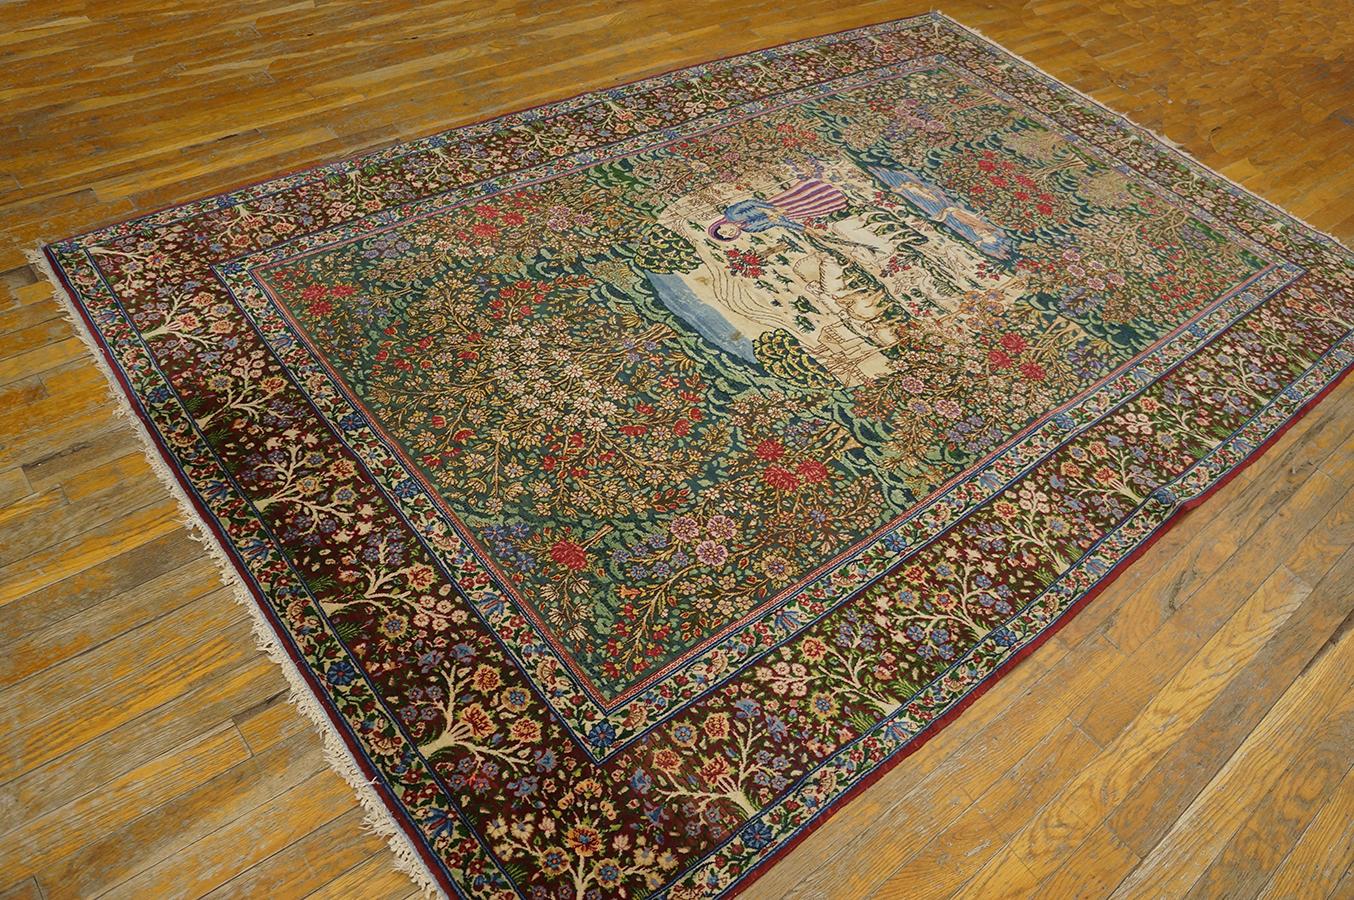 Hand-Knotted Early 20th Century Persian Kirman Carpet ( 4'10